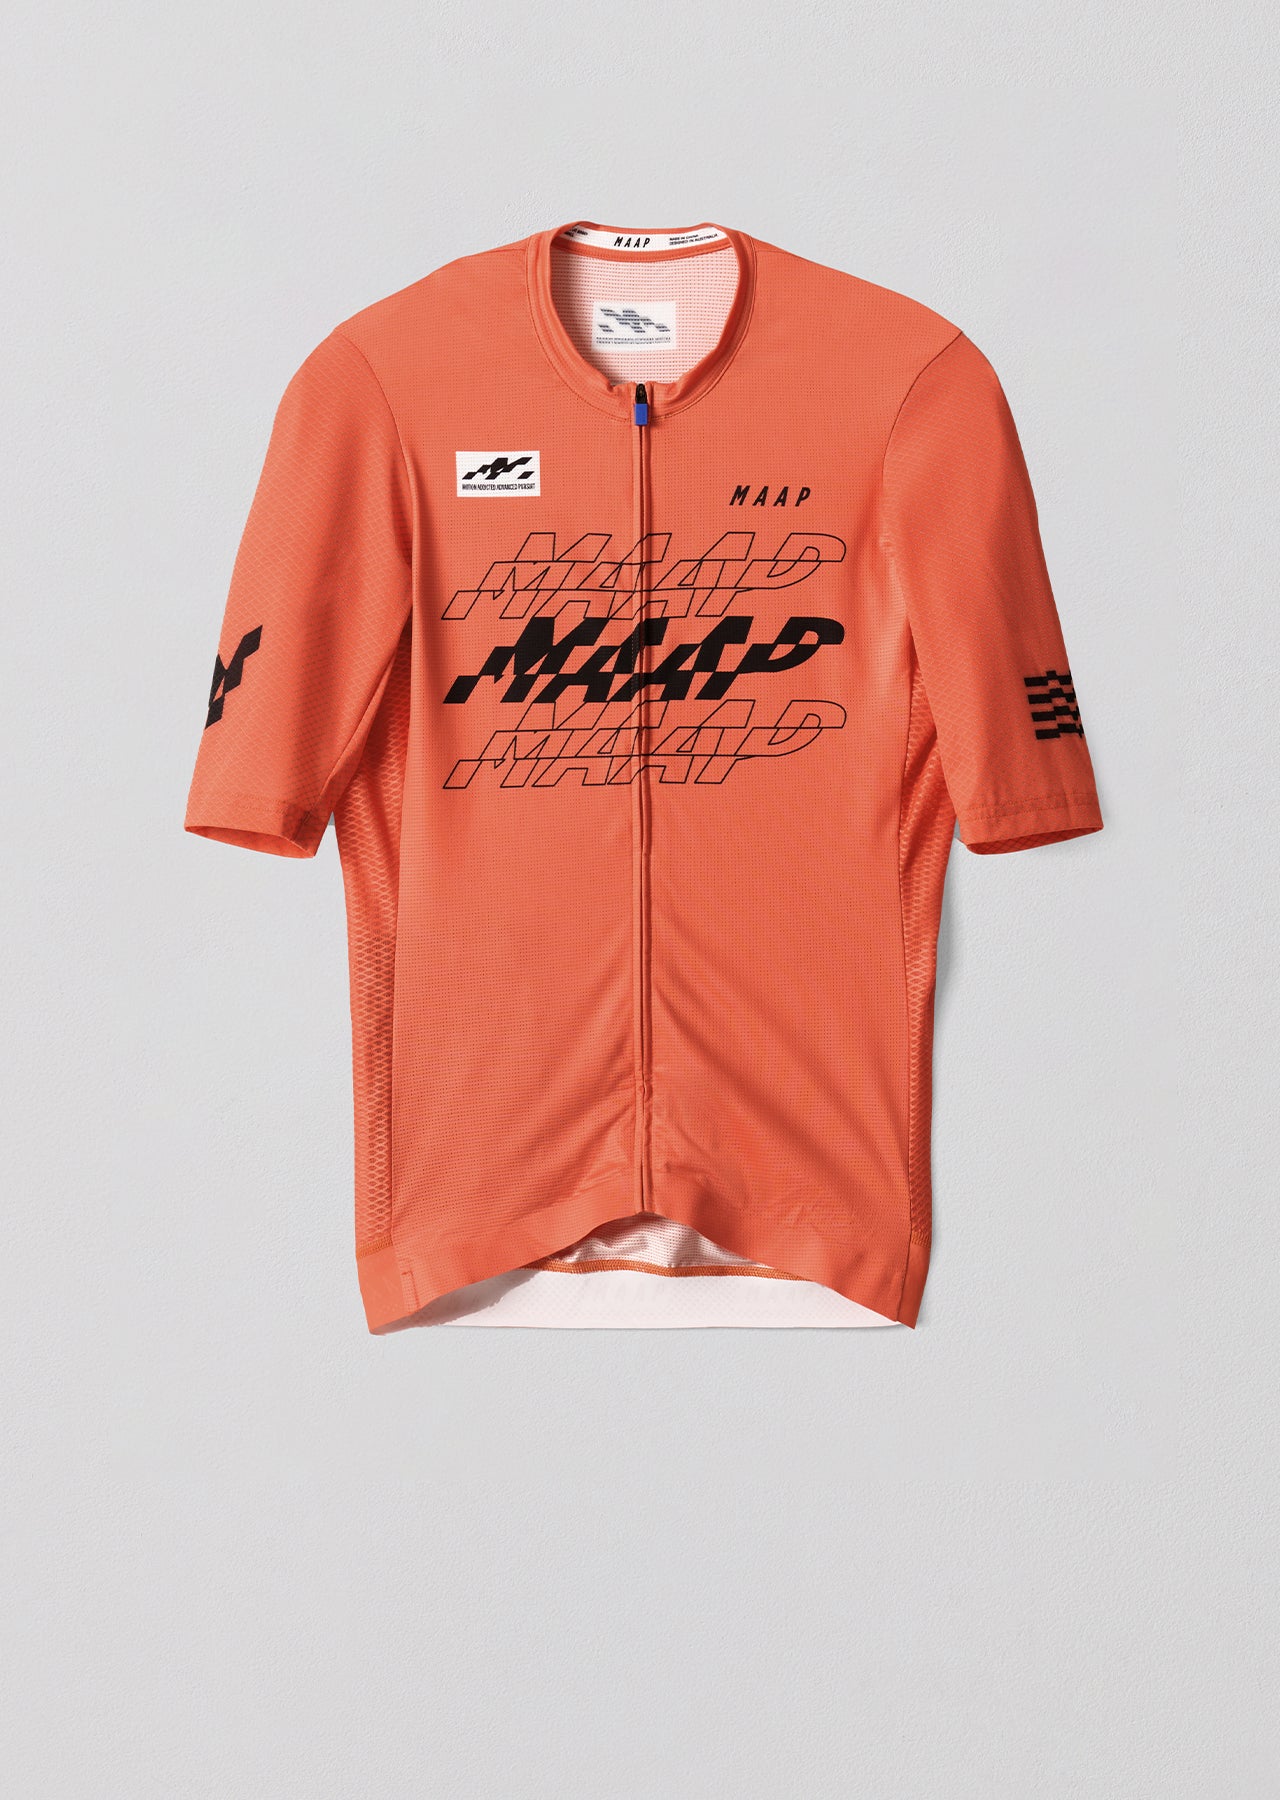 Fragment Pro Air Jersey 2.0 - MAAP Cycling Apparel